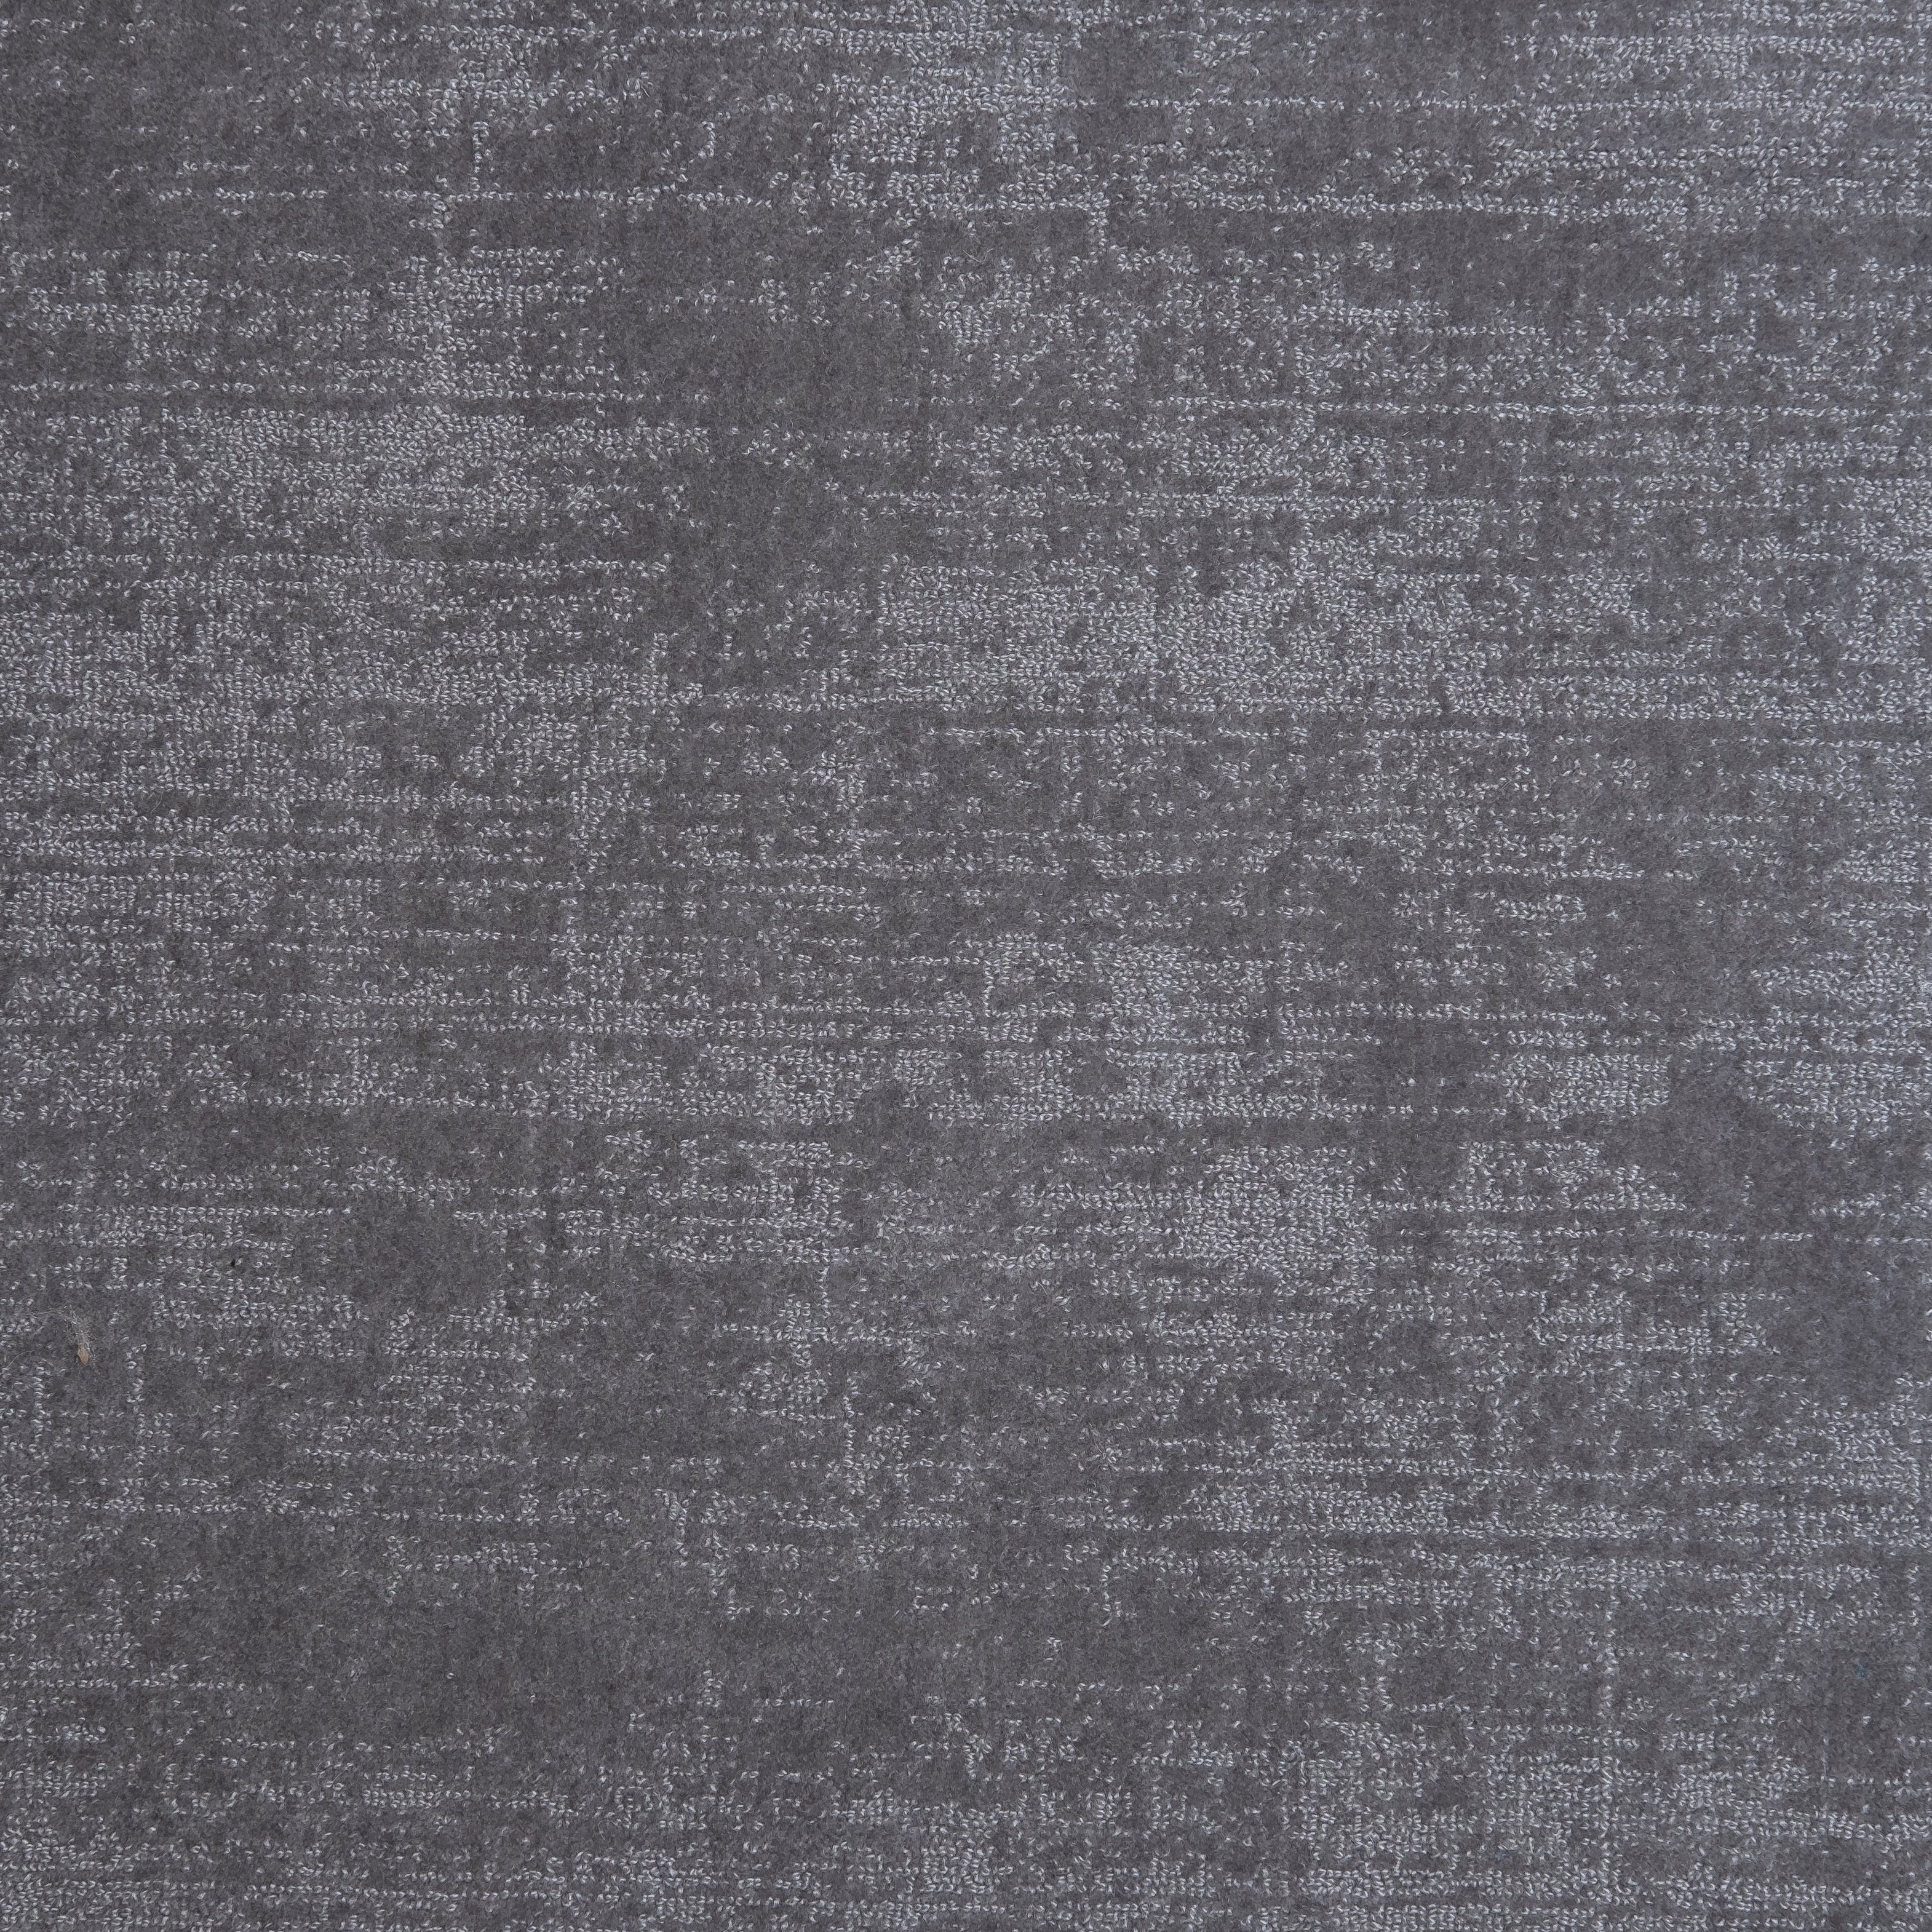 Nylon broadloom carpet swatch in a textured weave in iridescent charcoal.